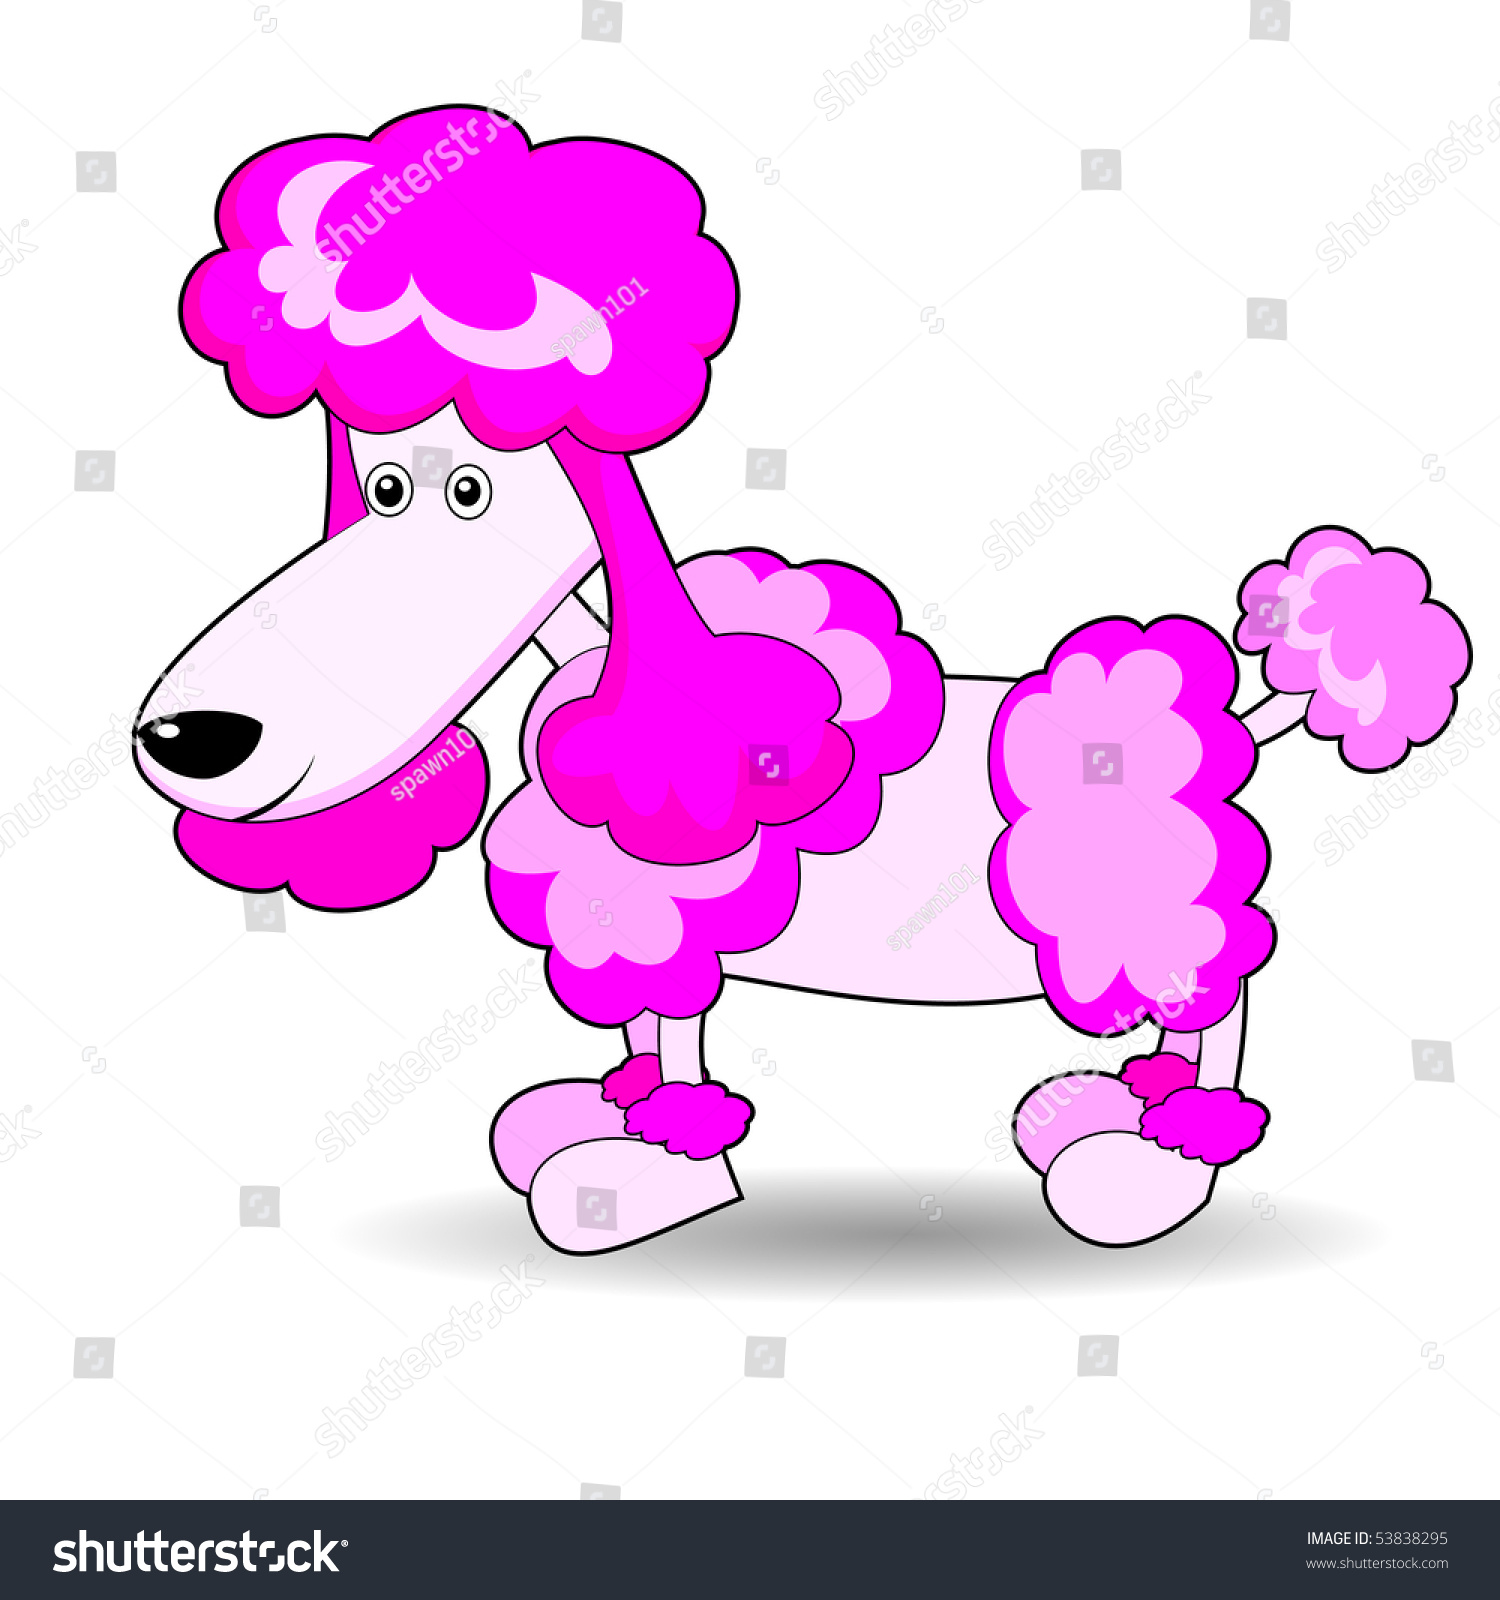 Cute Adorable Looking Poodle Stock Vector Illustration 53838295